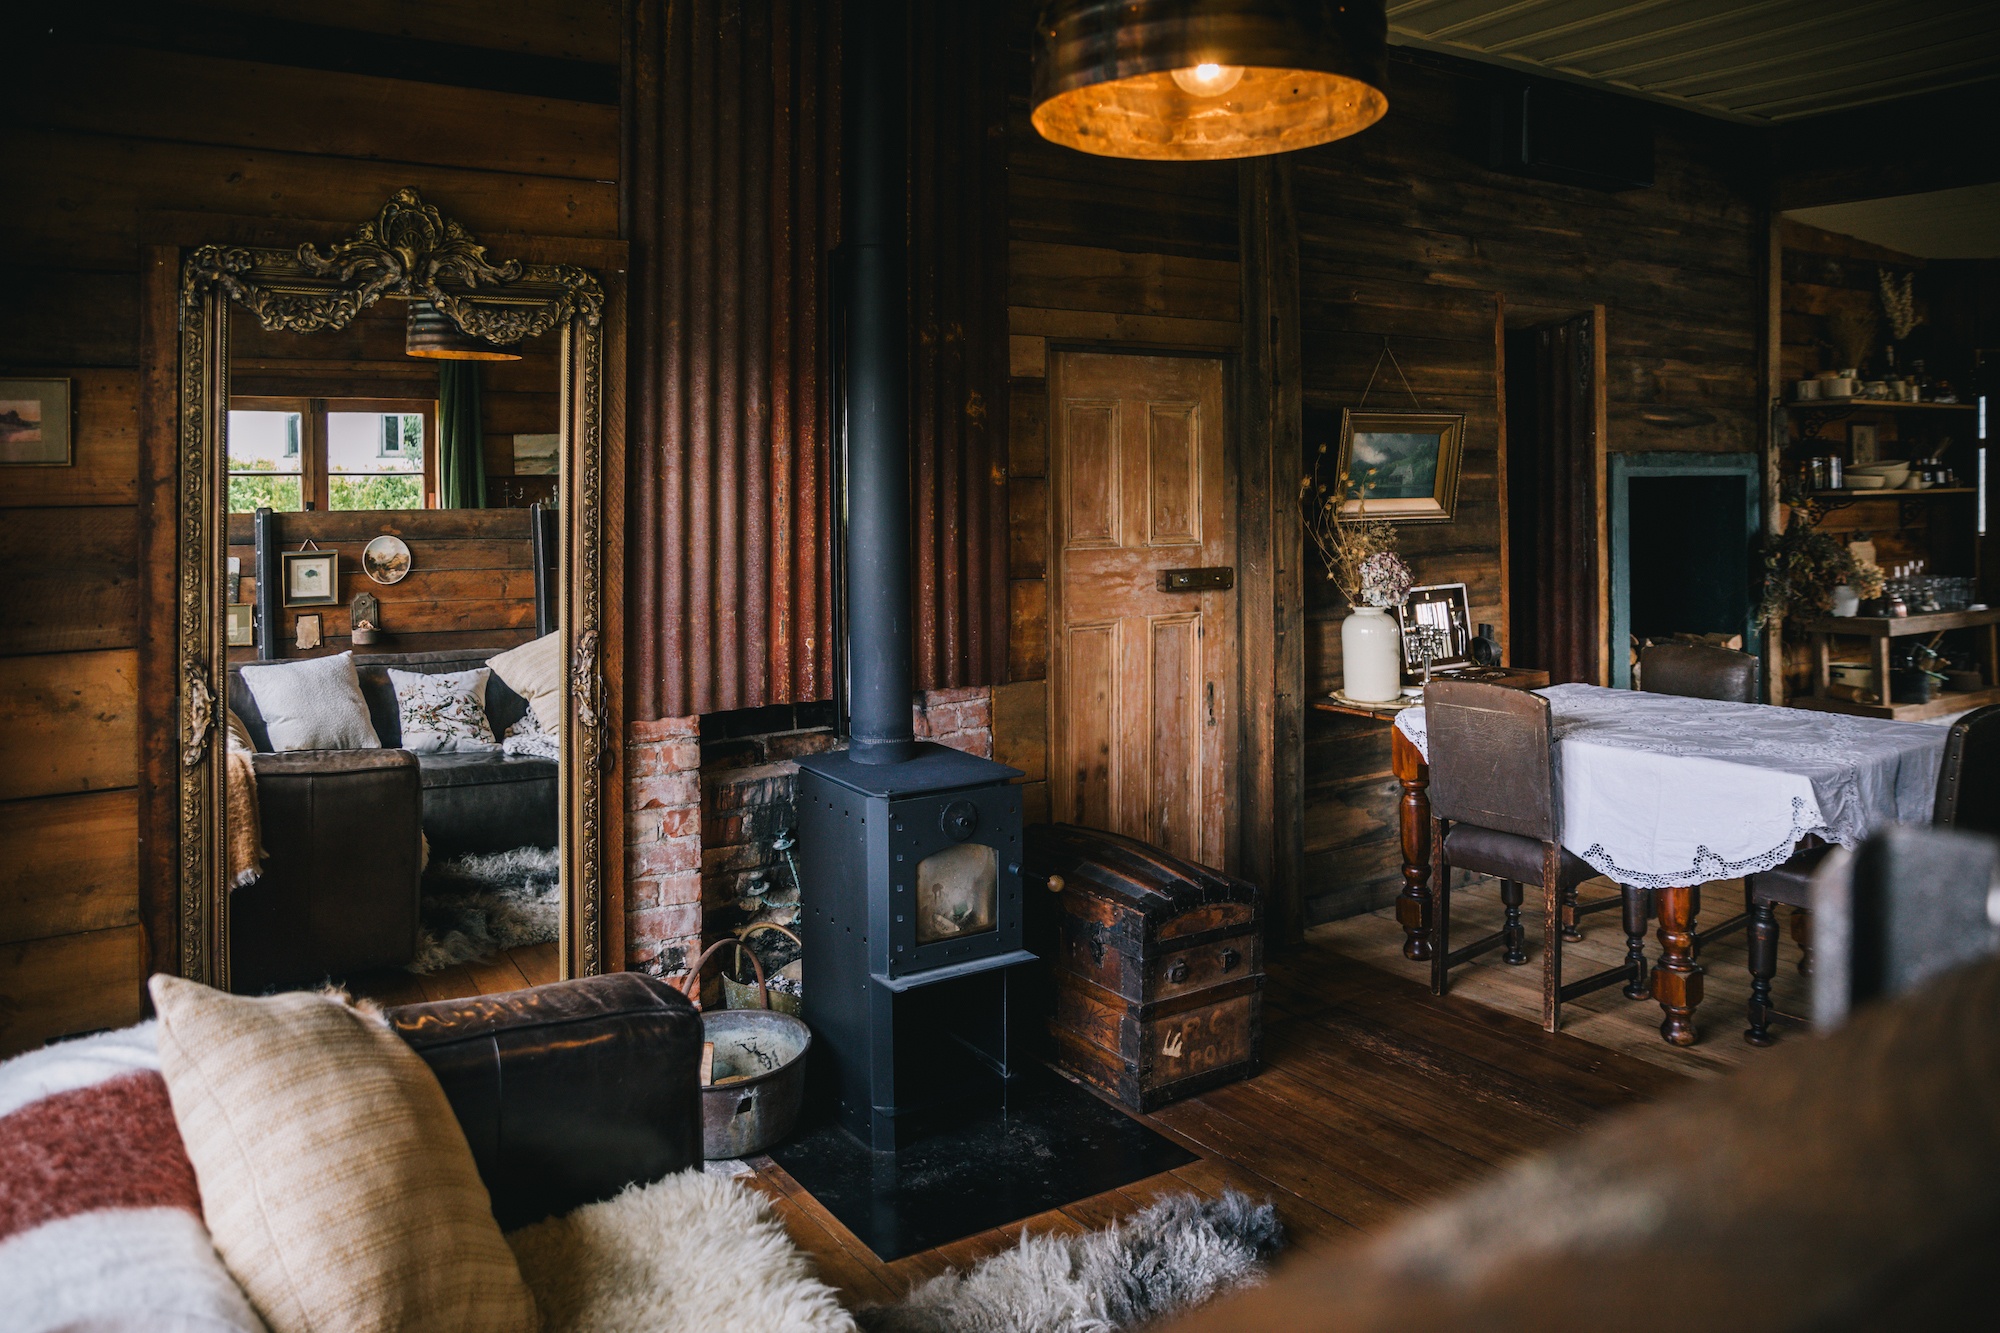 A cozy getaway in Reefton at the Brewer’s Night Inn